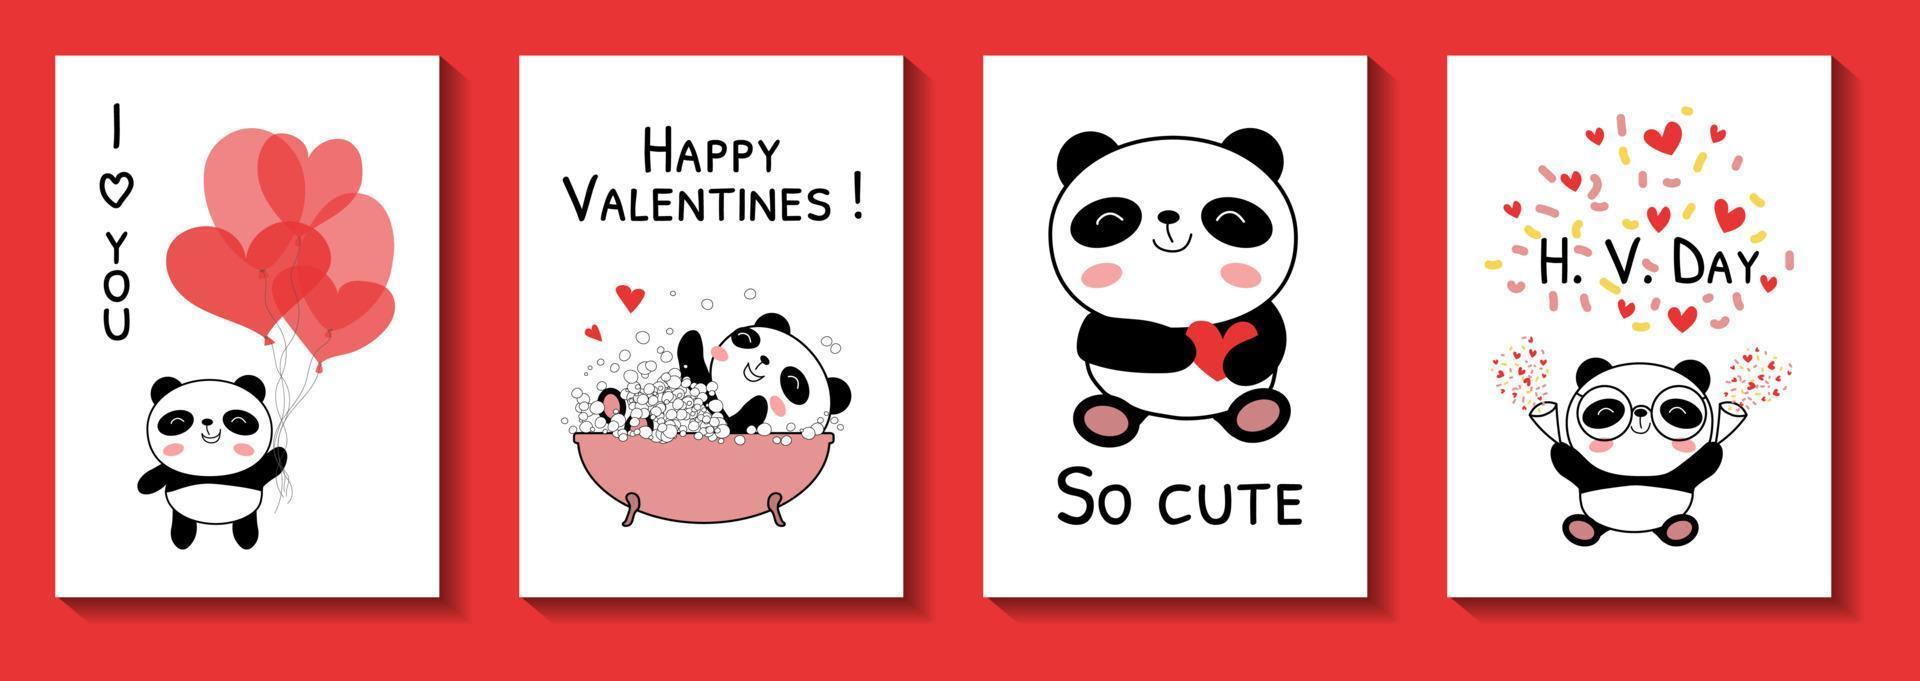 Valentines day cards with baby pandas vector illustration